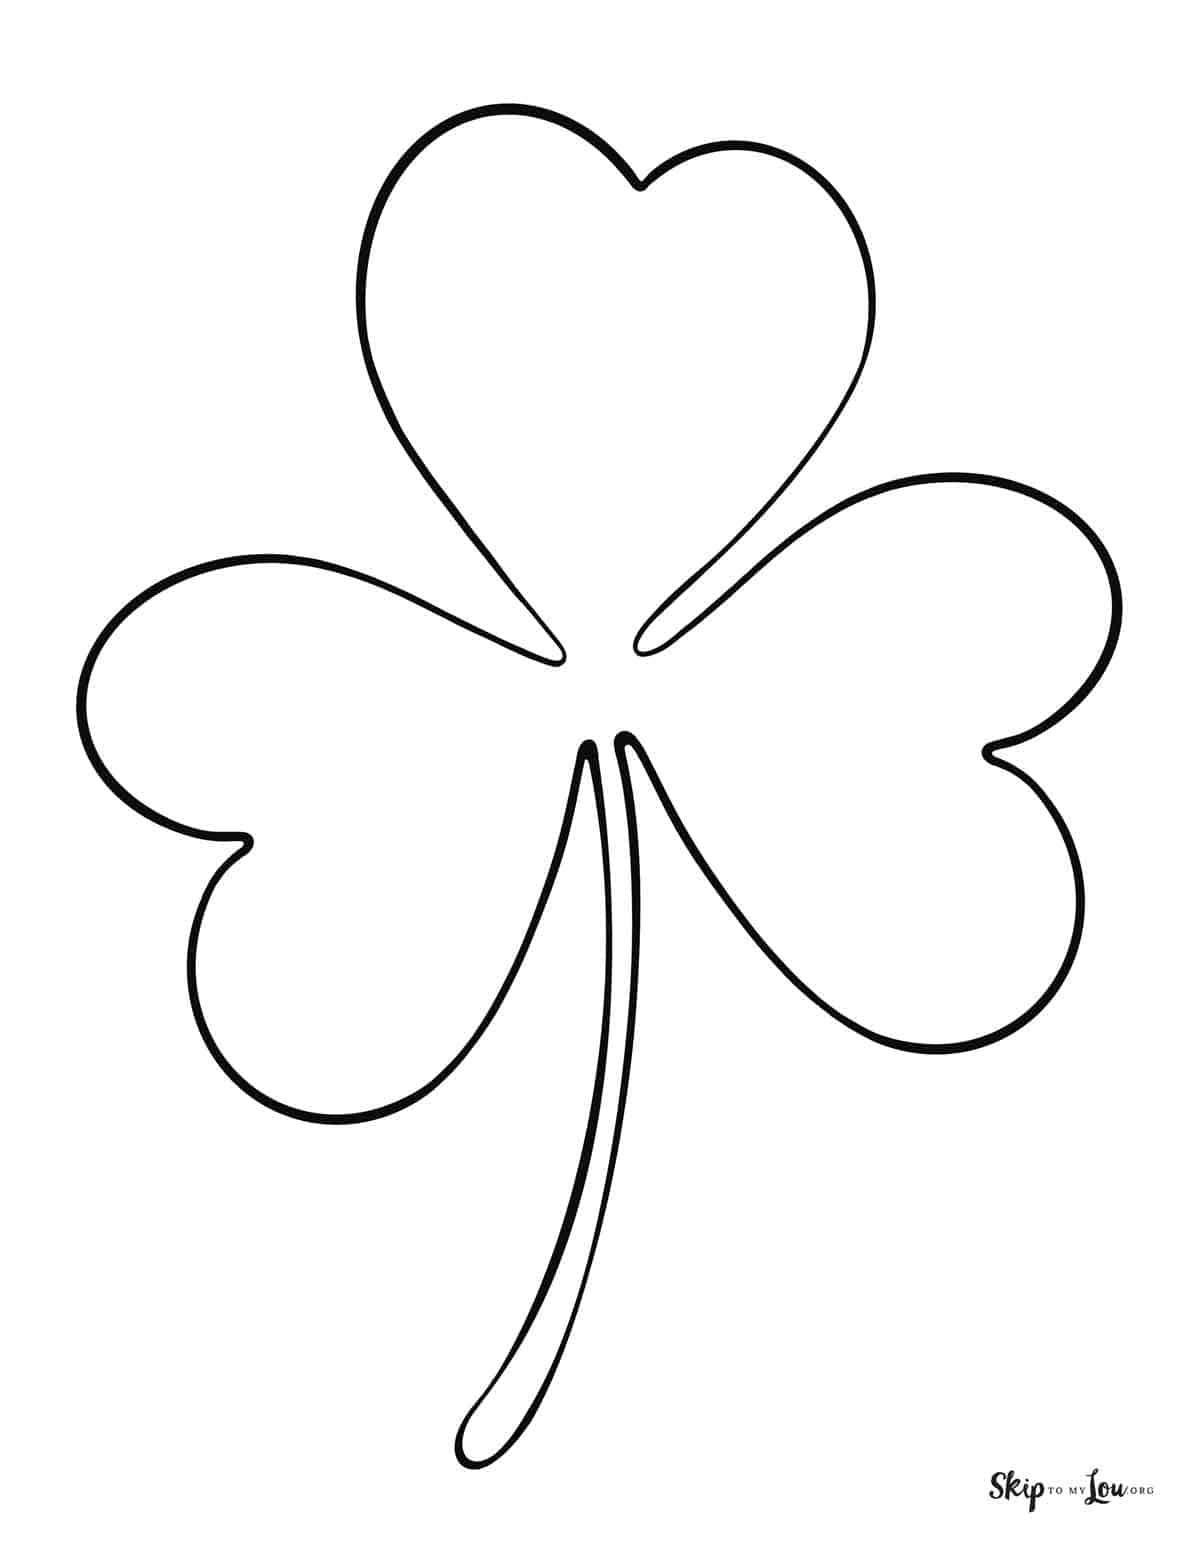 Shamrock coloring pages skip to my lou